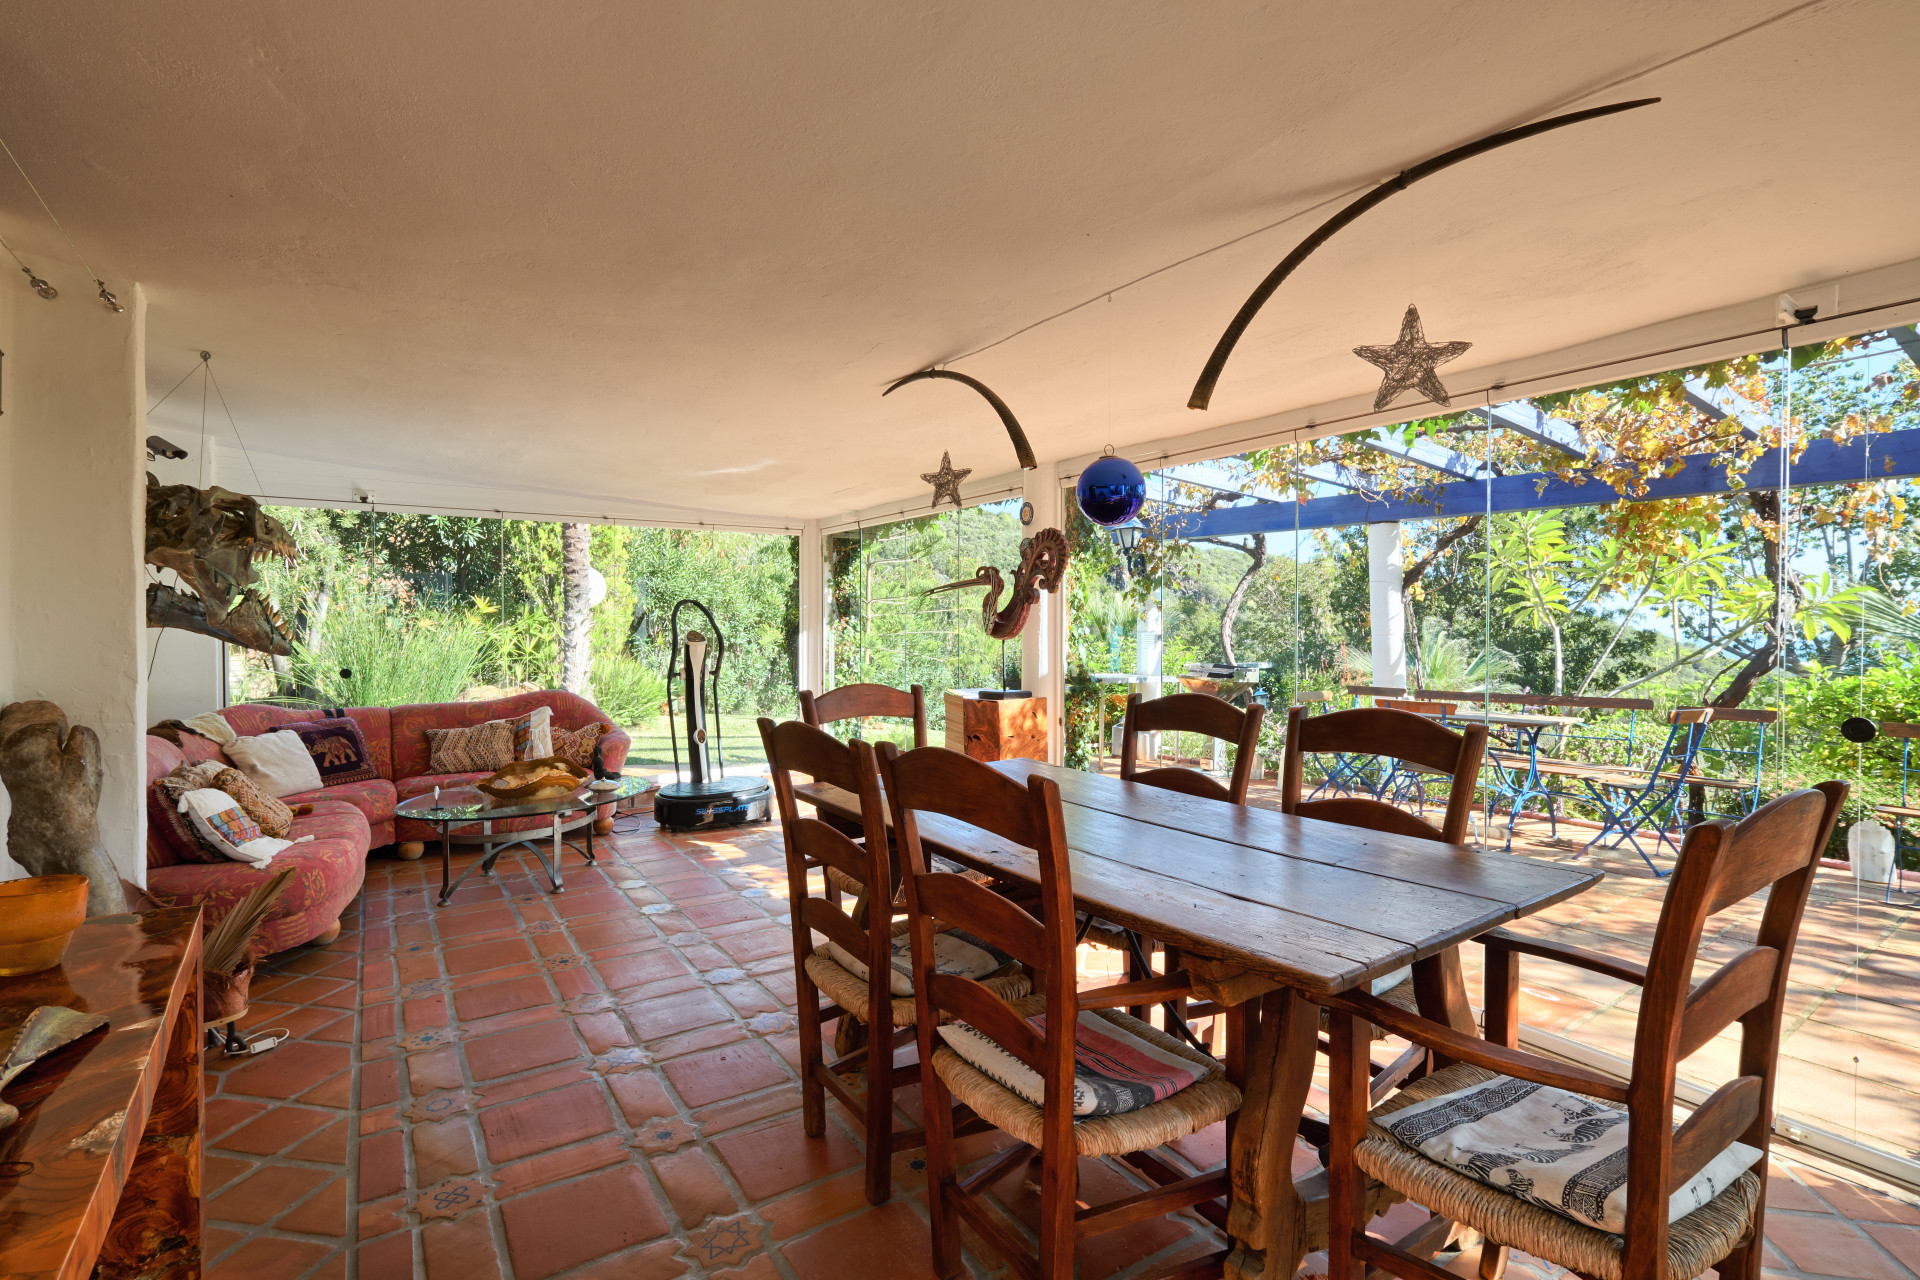 Beautiful finca situated in Los Reales, close to Estepona.